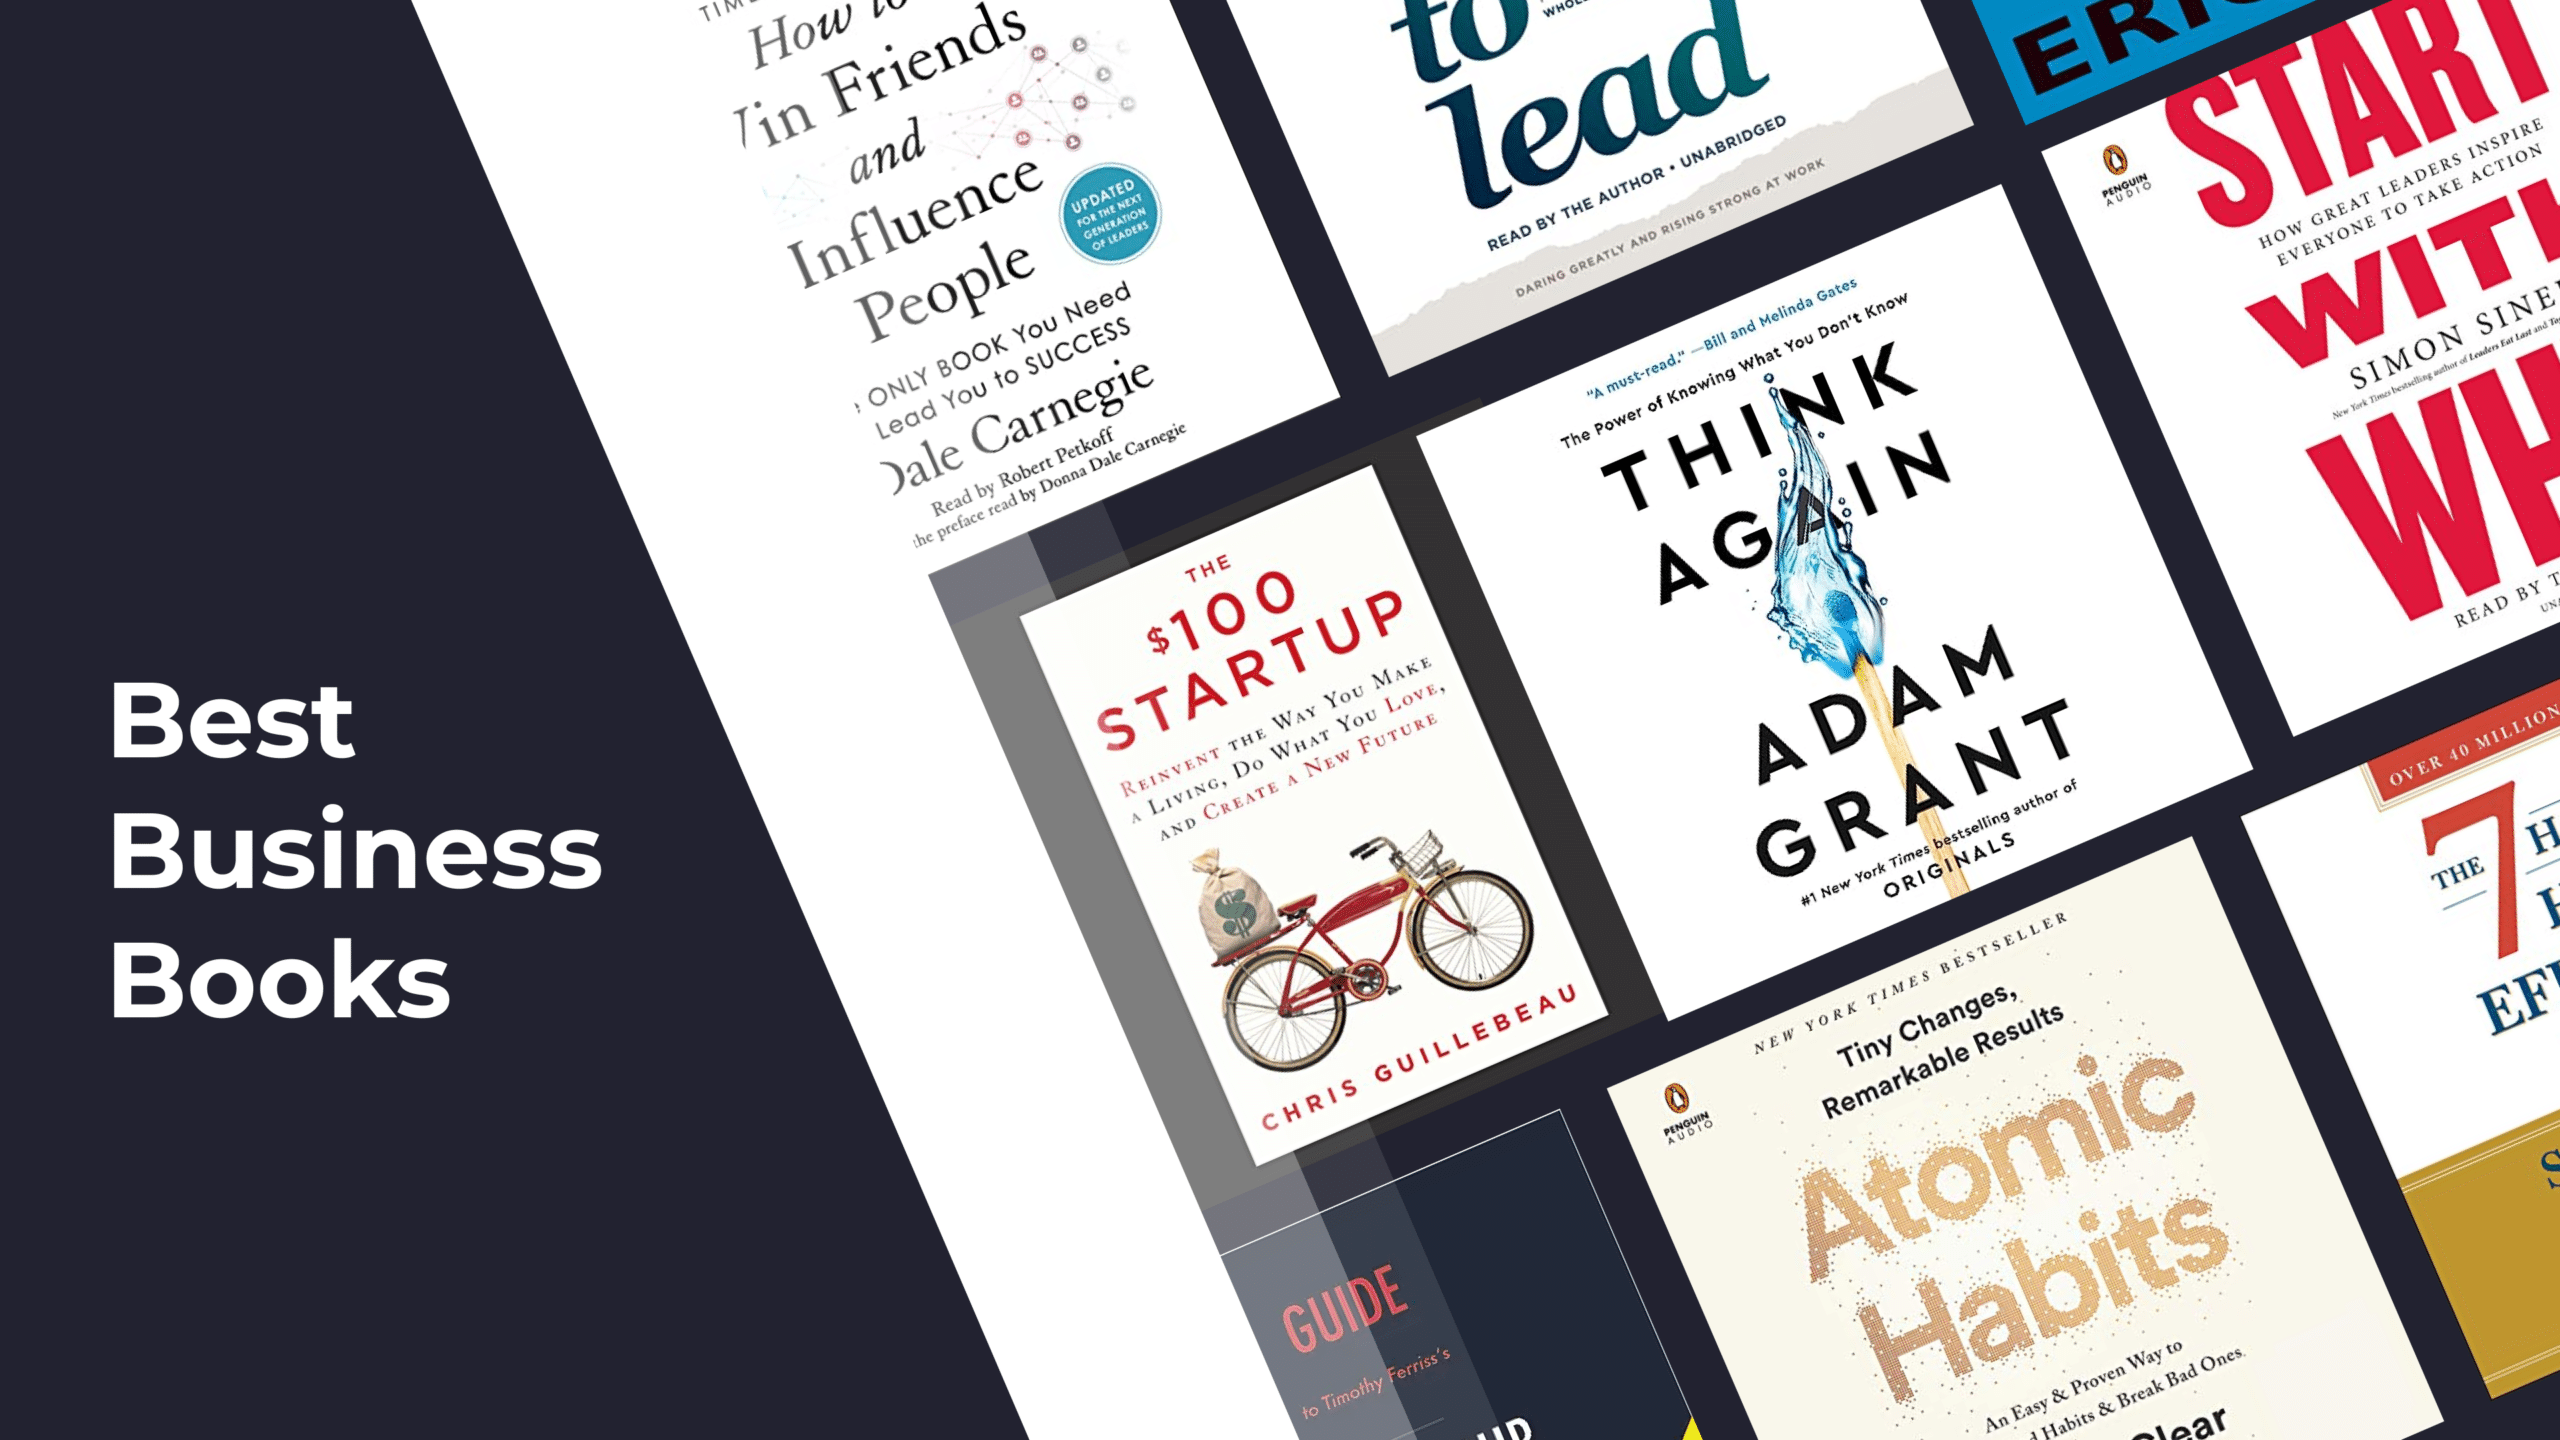 The Best Business Books: Bestsellers List